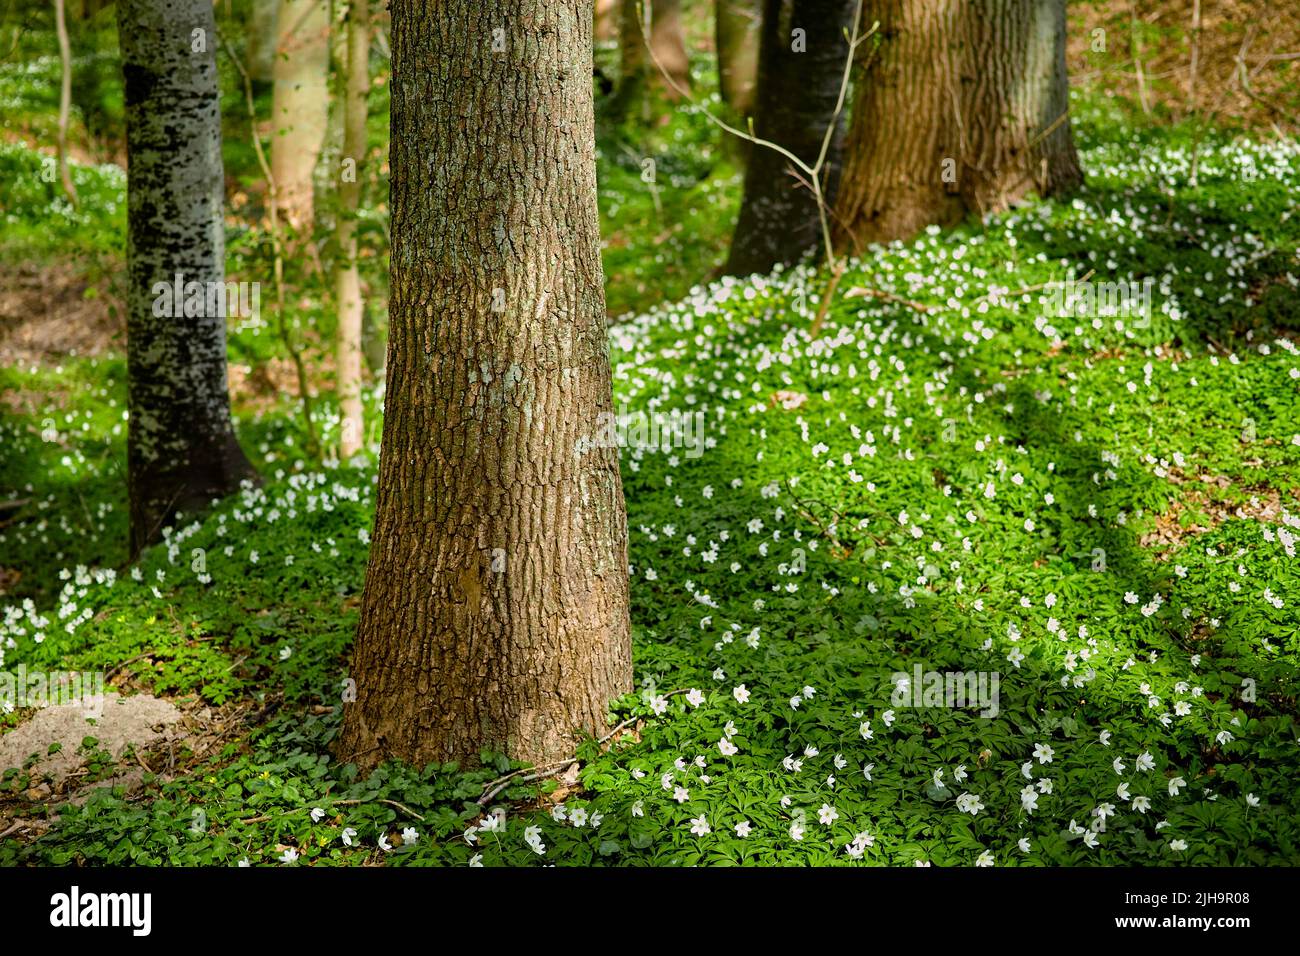 Wild trees growing in a forest with white anemone nemorosa flowers and green plants. Scenic landscape of tall wooden trunks with lush leaves in nature Stock Photo